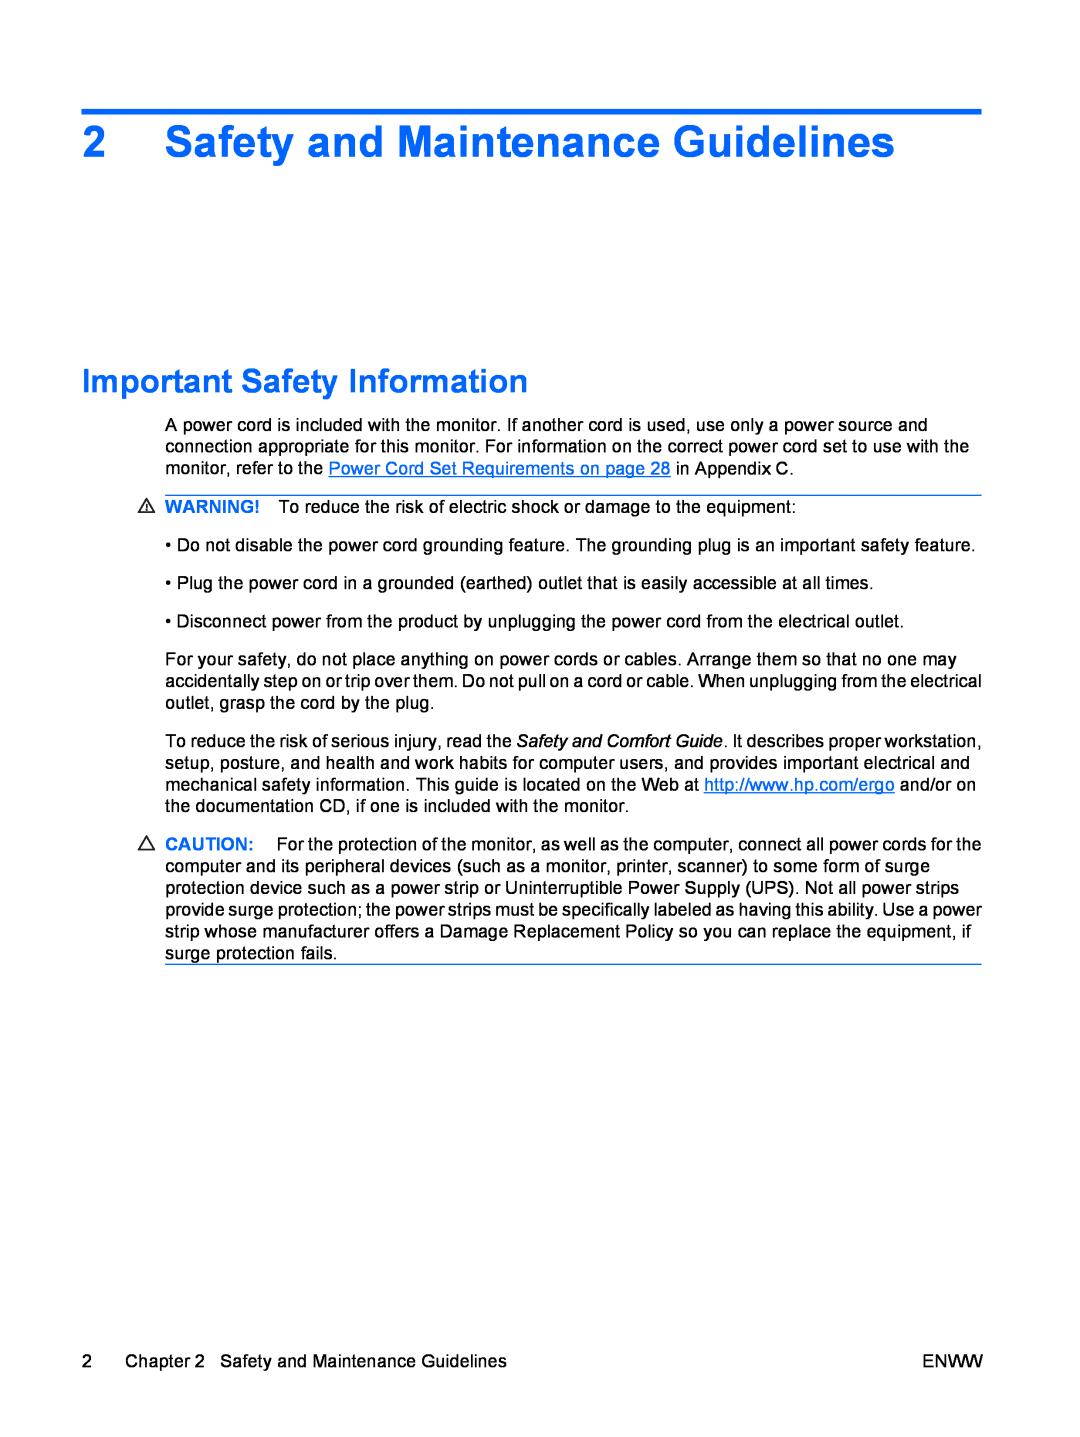 HP CQ1859E manual Safety and Maintenance Guidelines, Important Safety Information 